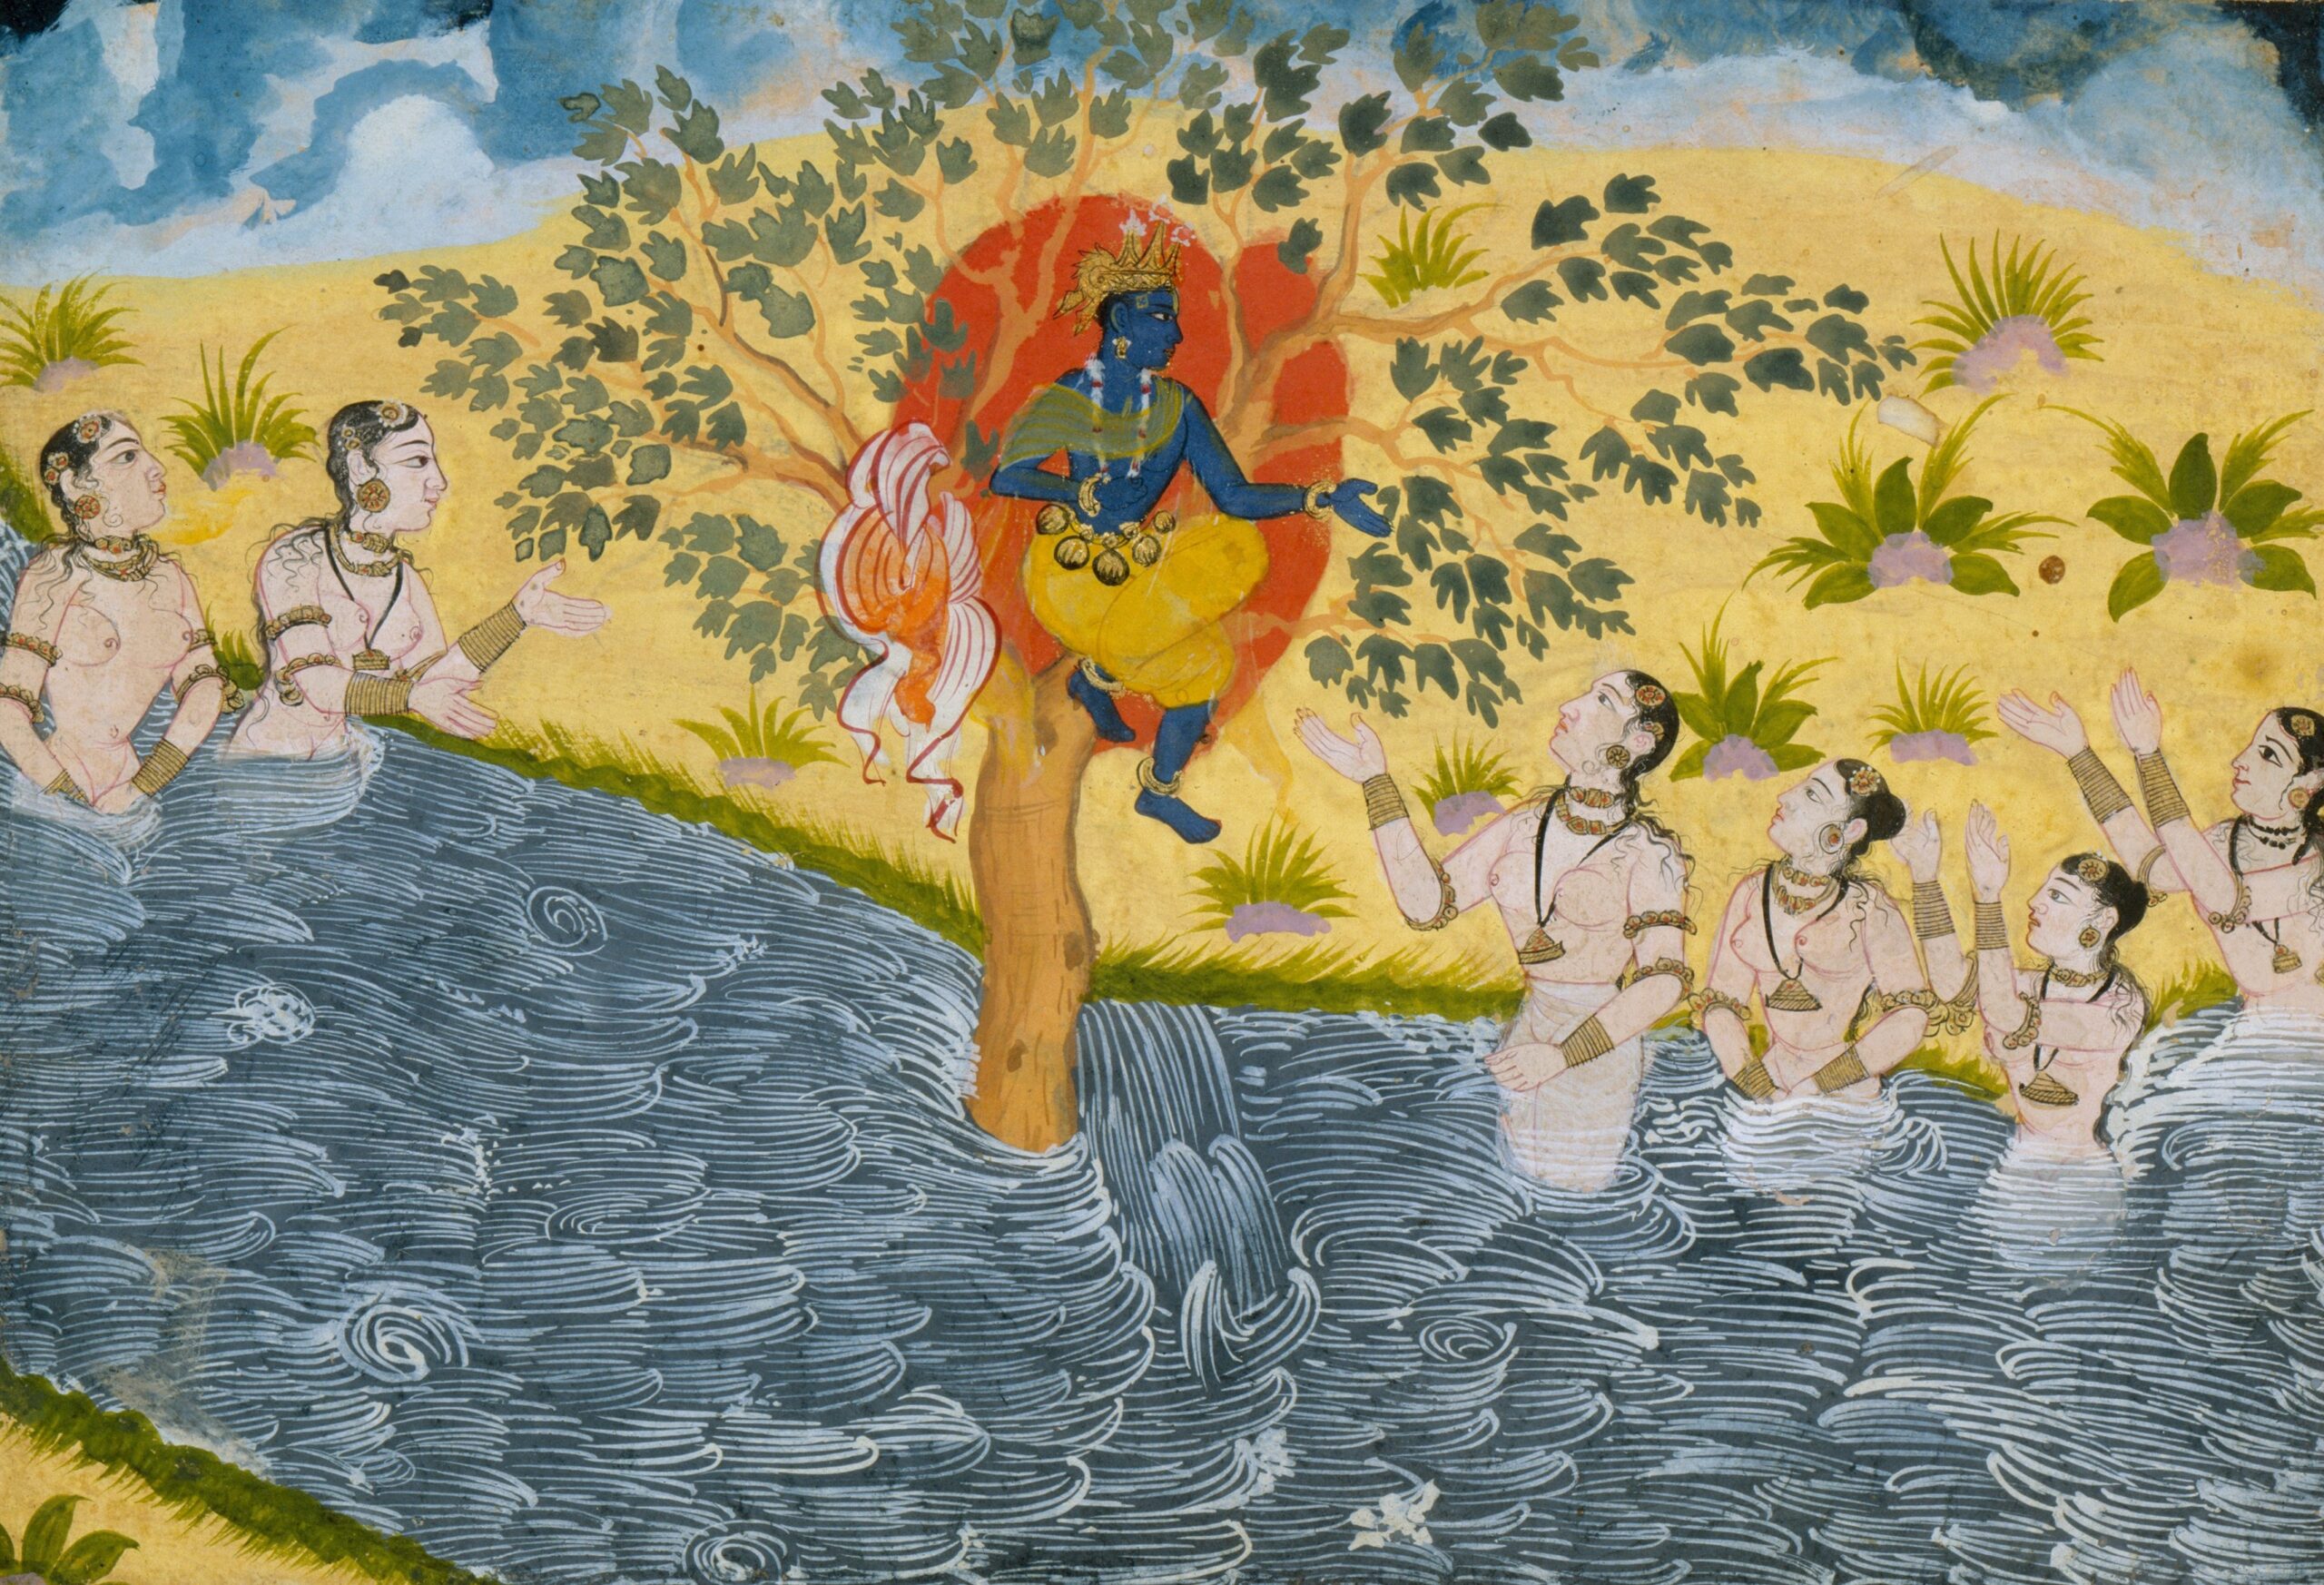 Narrative Paintings across South Asia